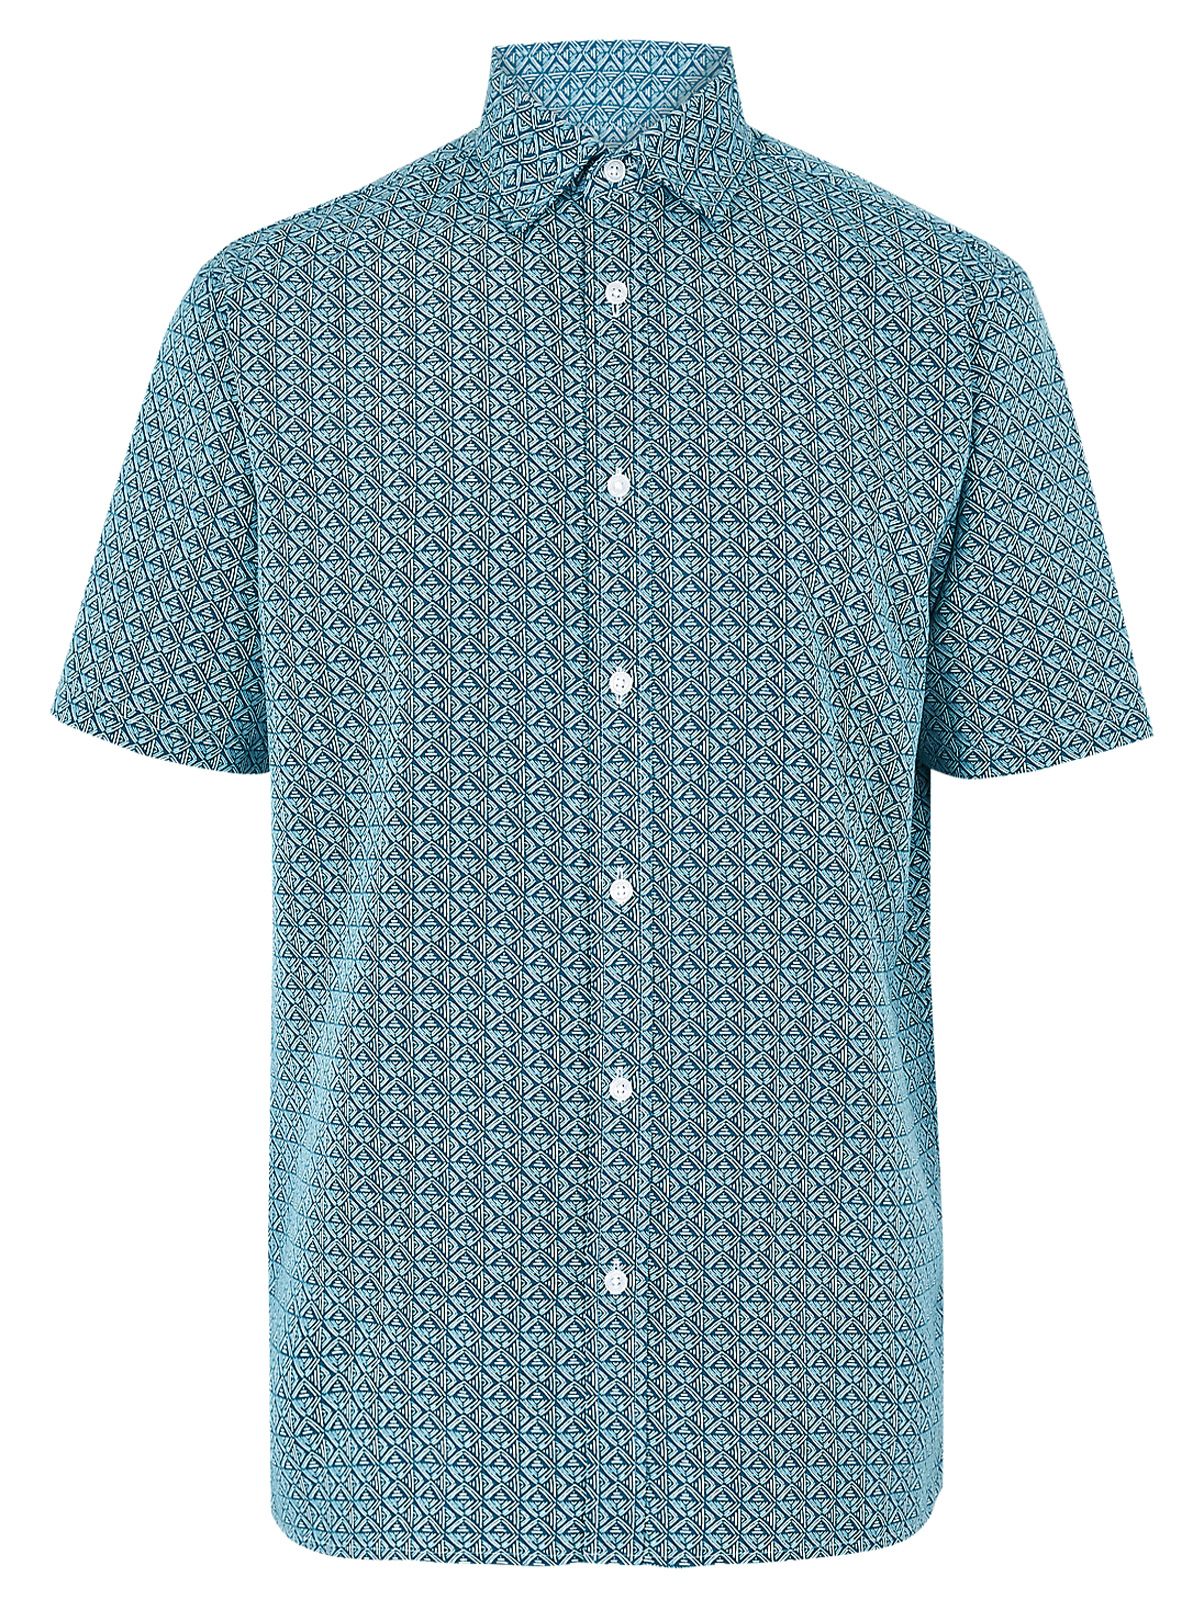 Marks and Spencer - - M&5 TEAL Pure Cotton Short Sleeve Printed Shirt ...